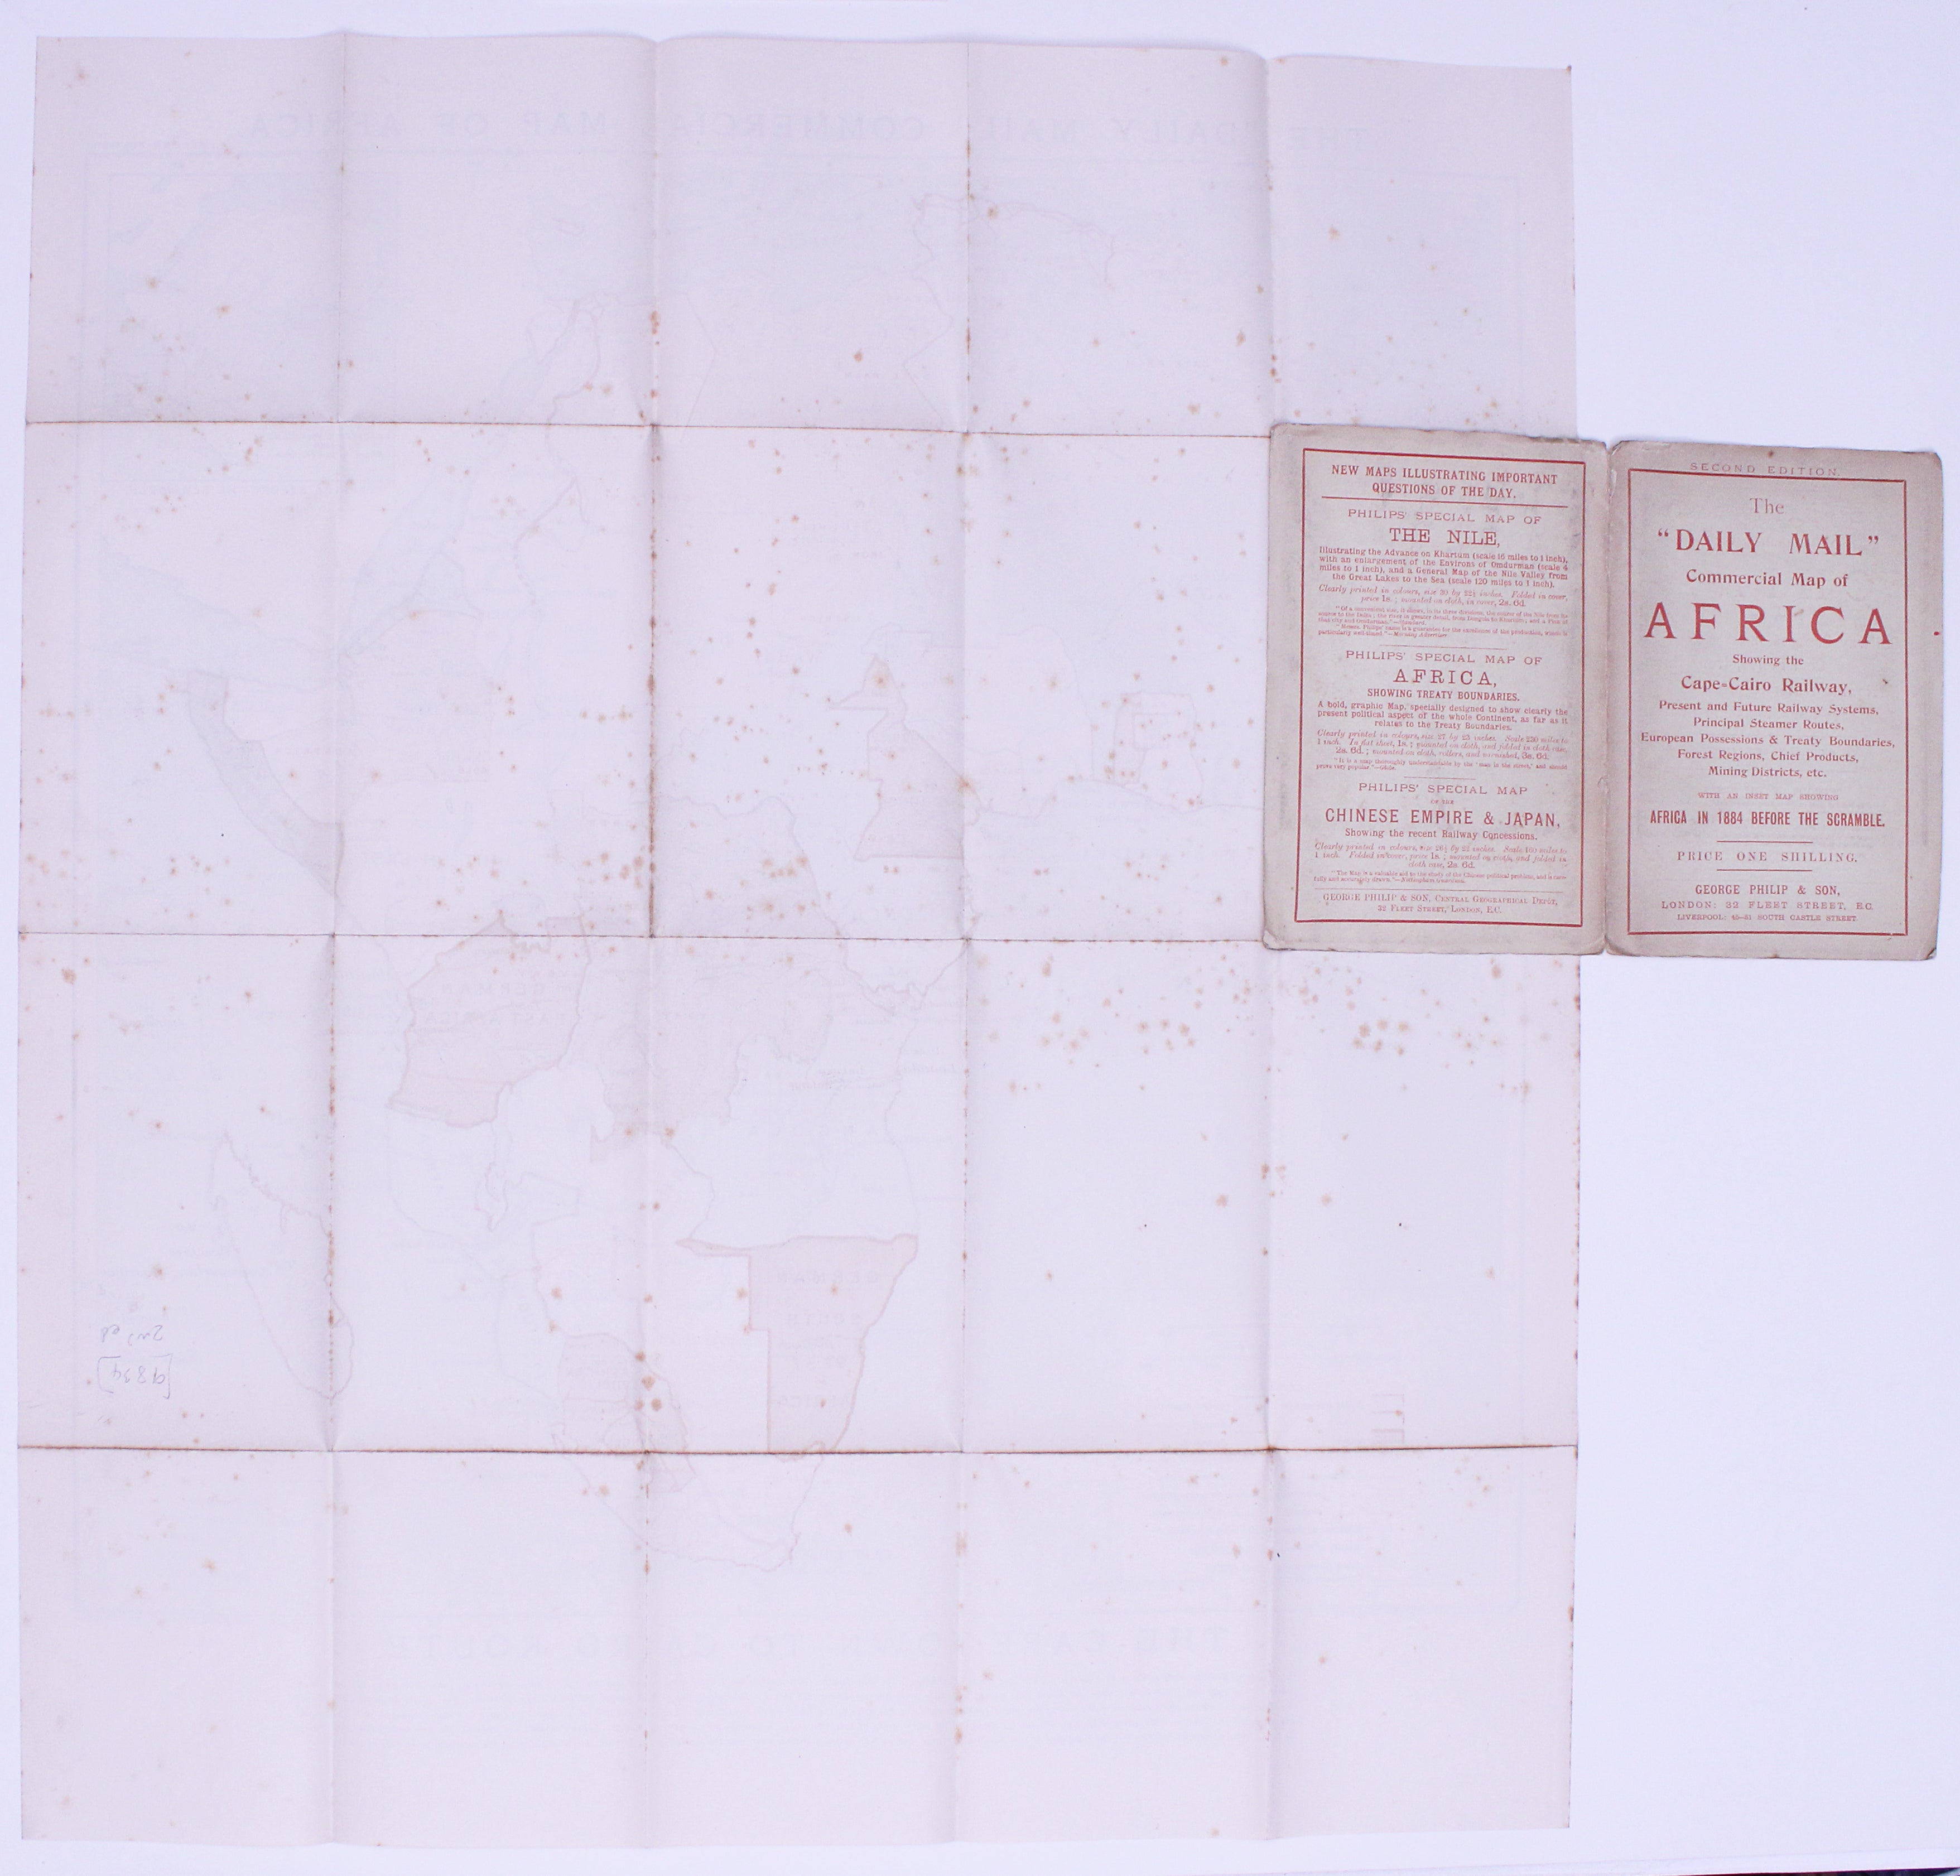 Daily Mail Cape to Cairo Railway Map, 2nd edition